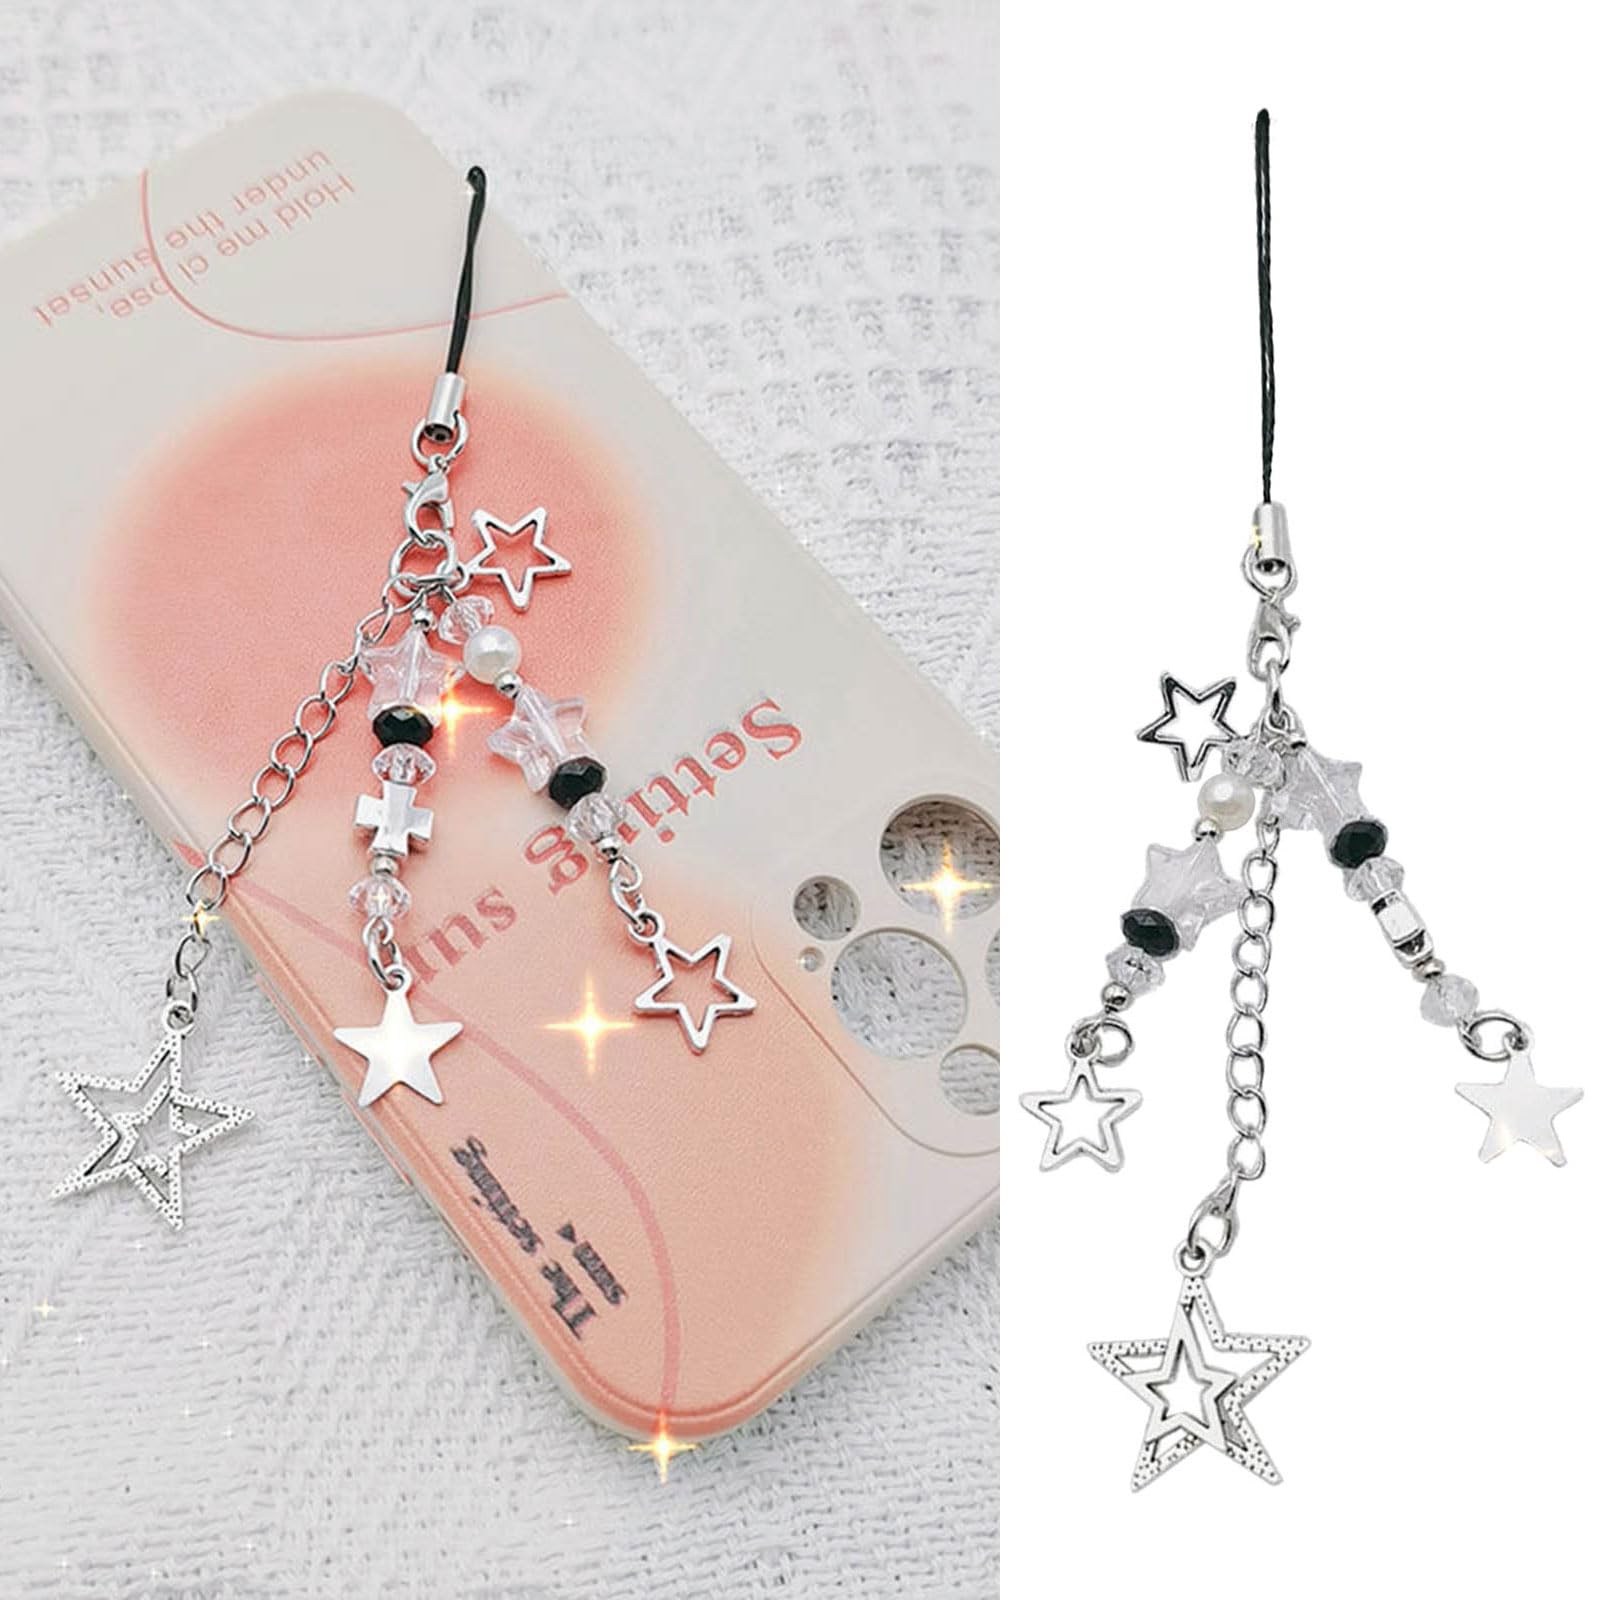 Necvior Pack Of 3 Star Phone Charm Keychain Bag Accessory Star Phone Strap Phone Jewelry Alloy Material For Fashion Lover Y2k Phone Chain